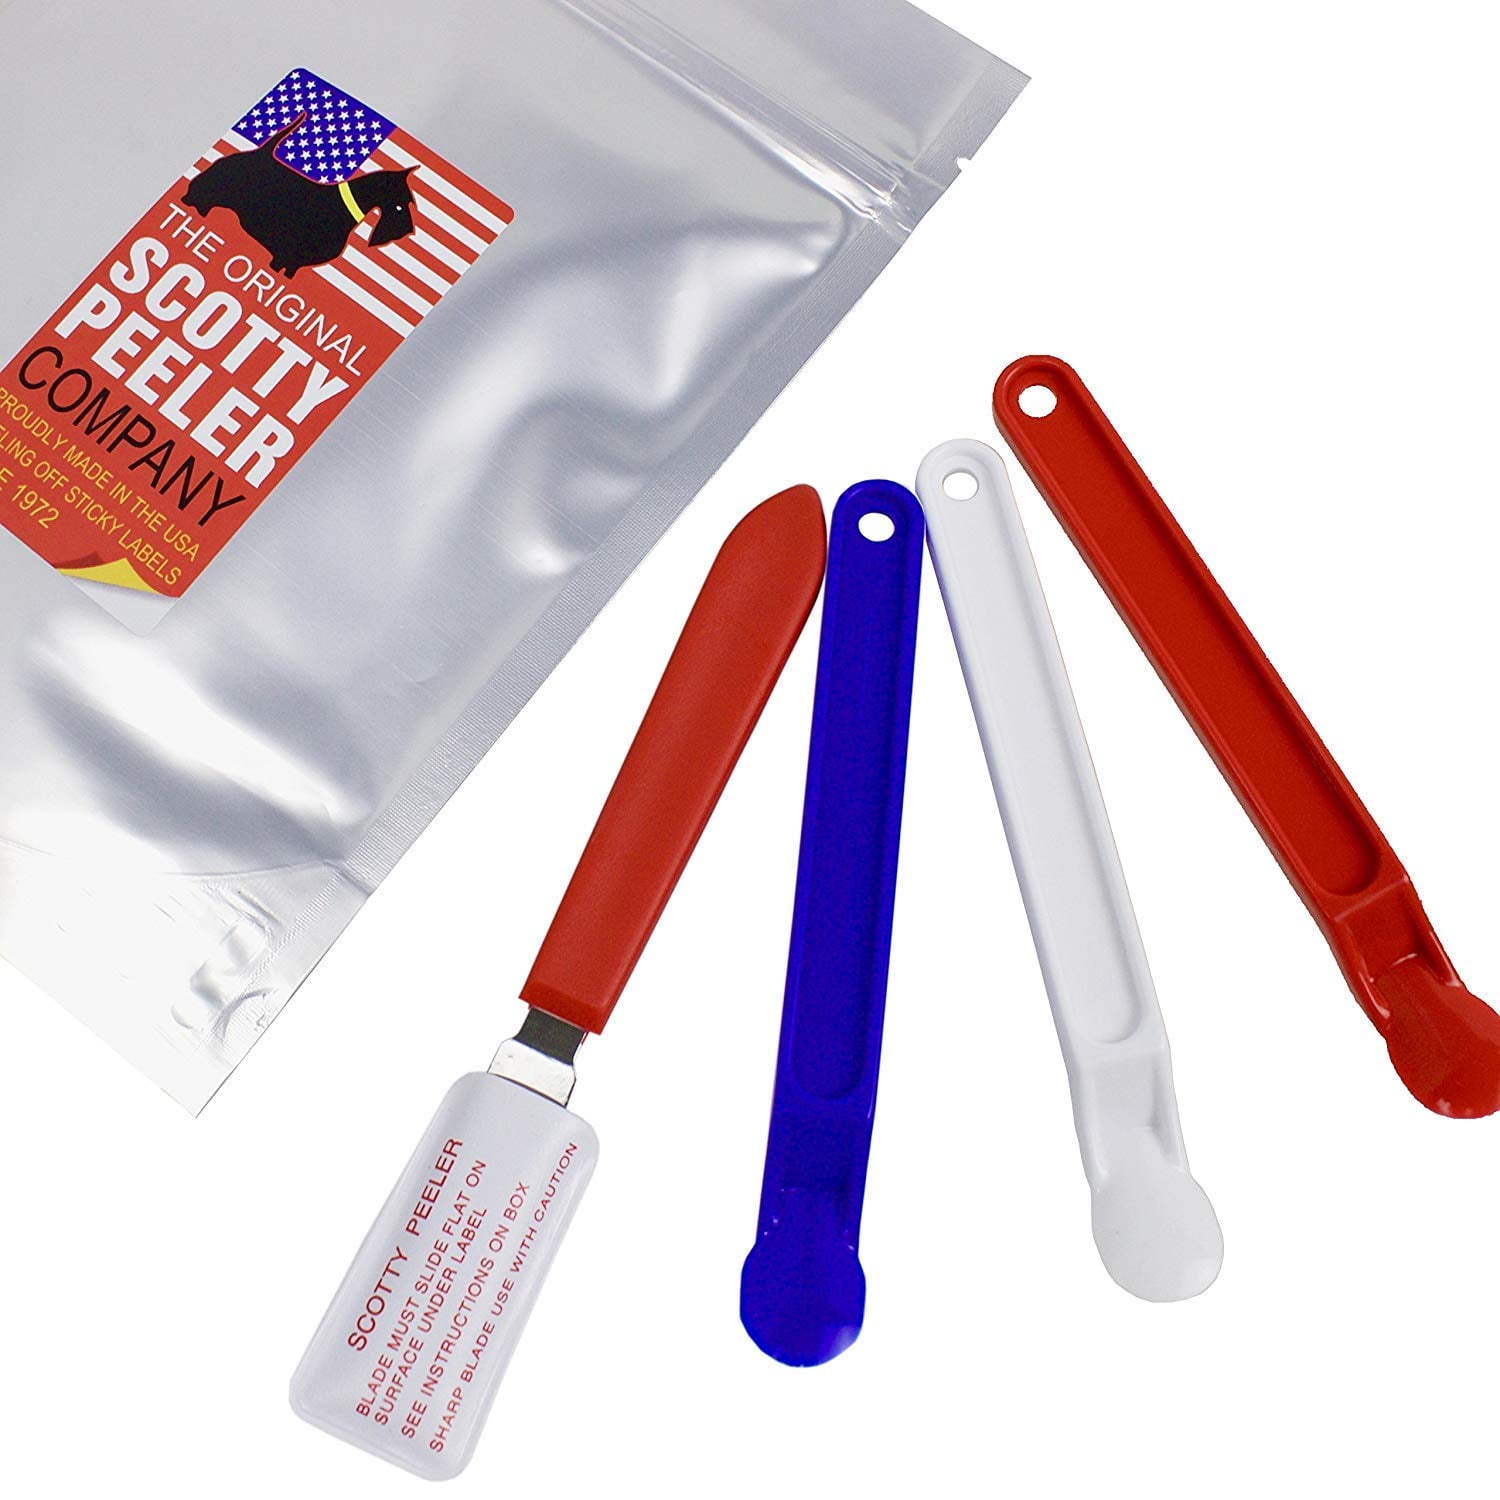 Scotty Peeler Label and Sticker Remover Set - 1 Original SP1, and 1 Metal  SP2. 2 Pieces by Scotty Peeler